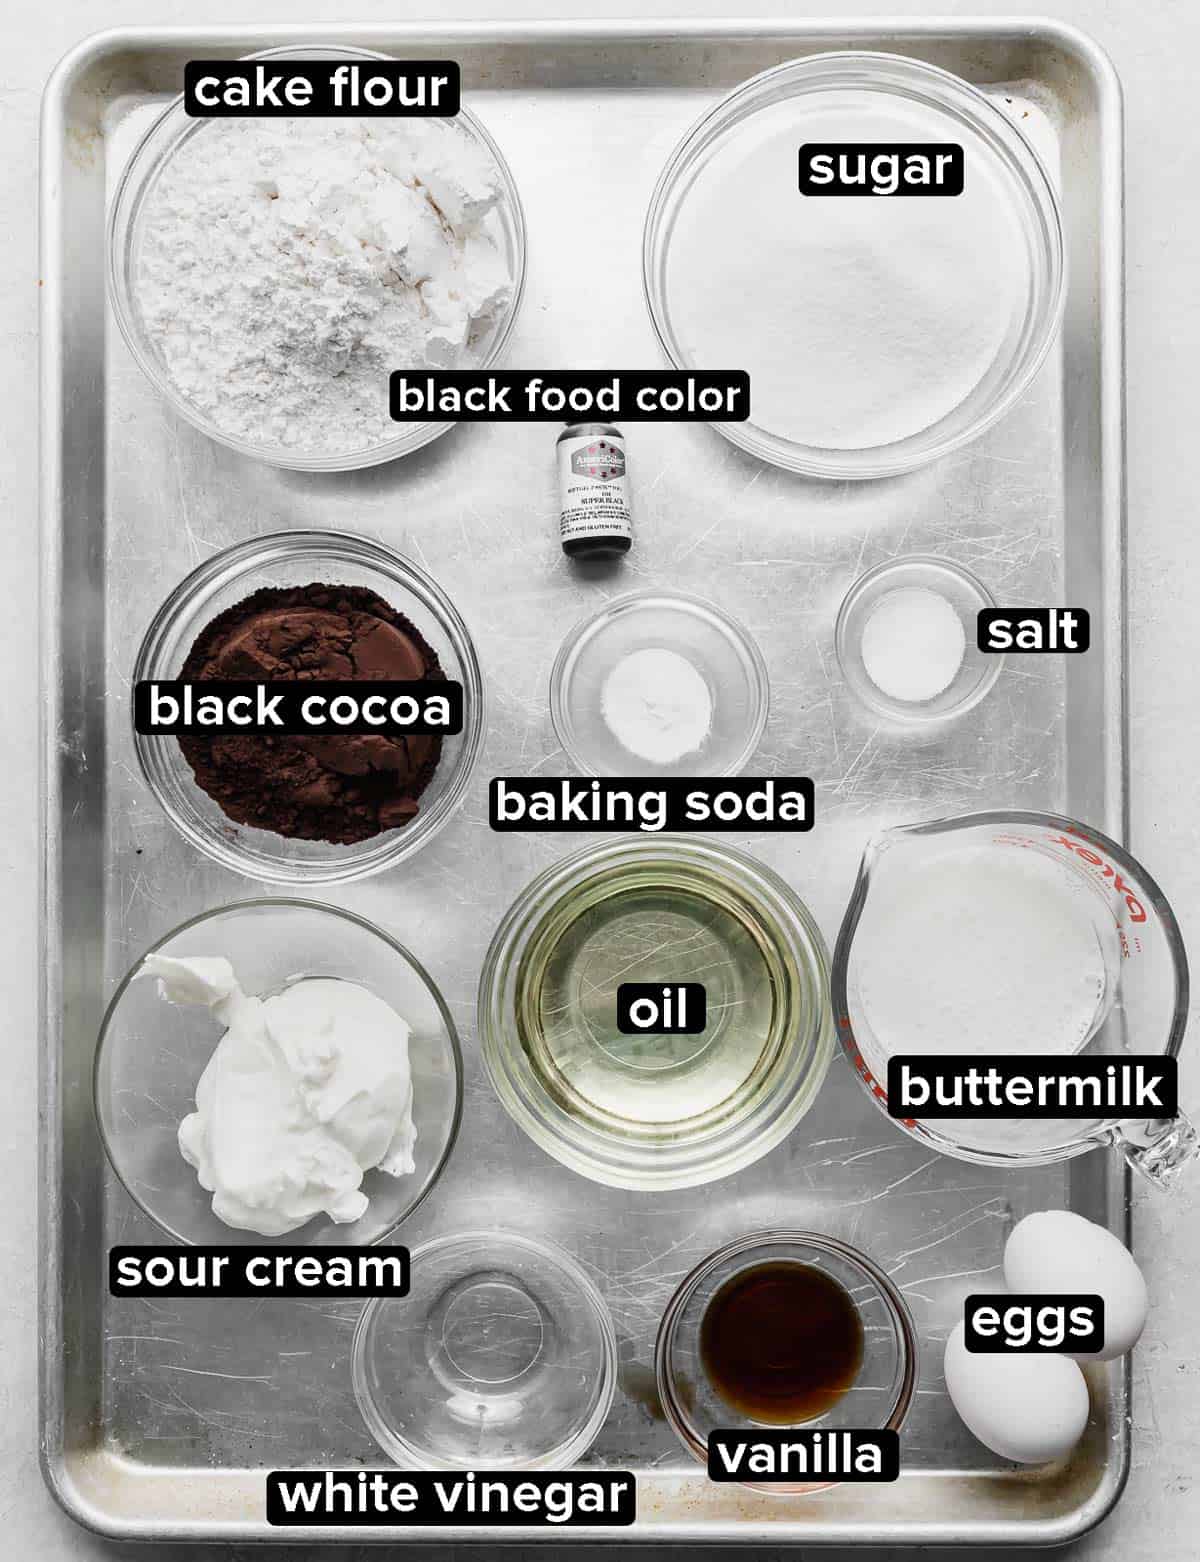 Black Velvet Cake ingredients portions into glass bowls on a silver baking sheet.